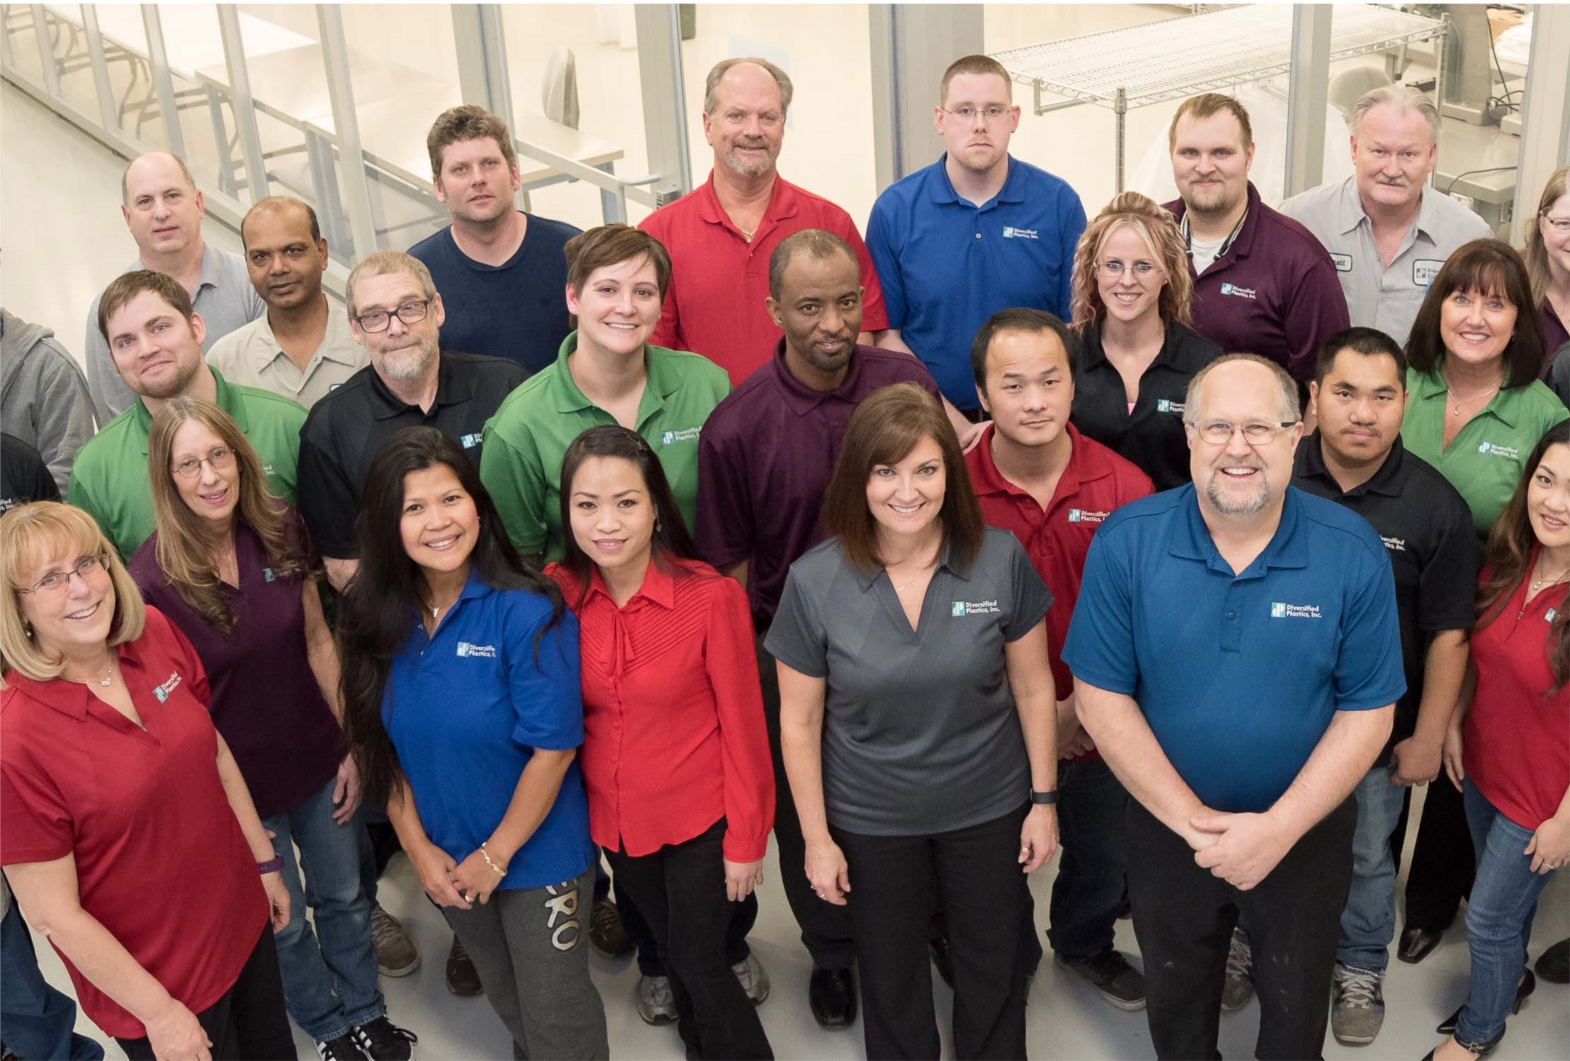 Employee-owned Diversified Plastics, Inc. (DPI) is a custom plastic-injection molder and digital manufacturer of high-precision, close-tolerance parts and components for medical device, filtration, aerospace and a variety of other industrial markets.